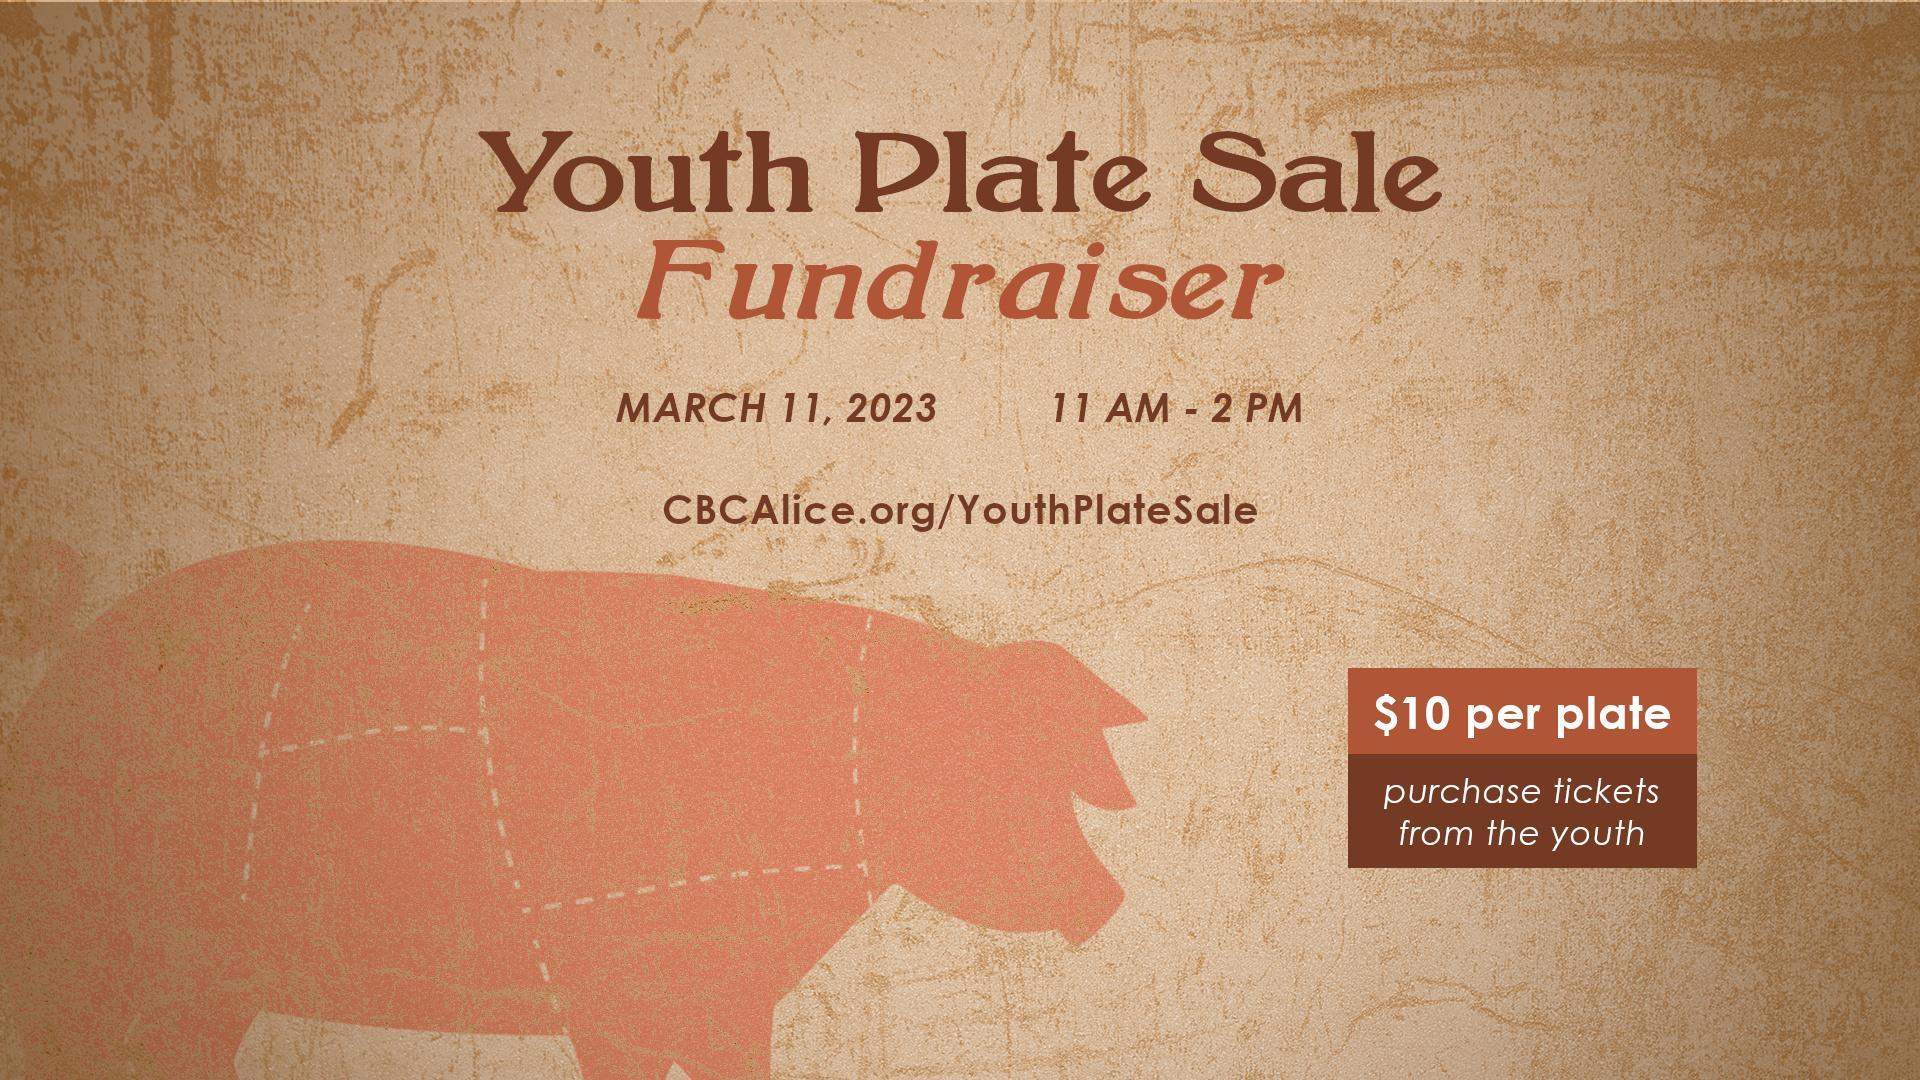 Pig and information about the youth plate fundraiser on March 11, 2023